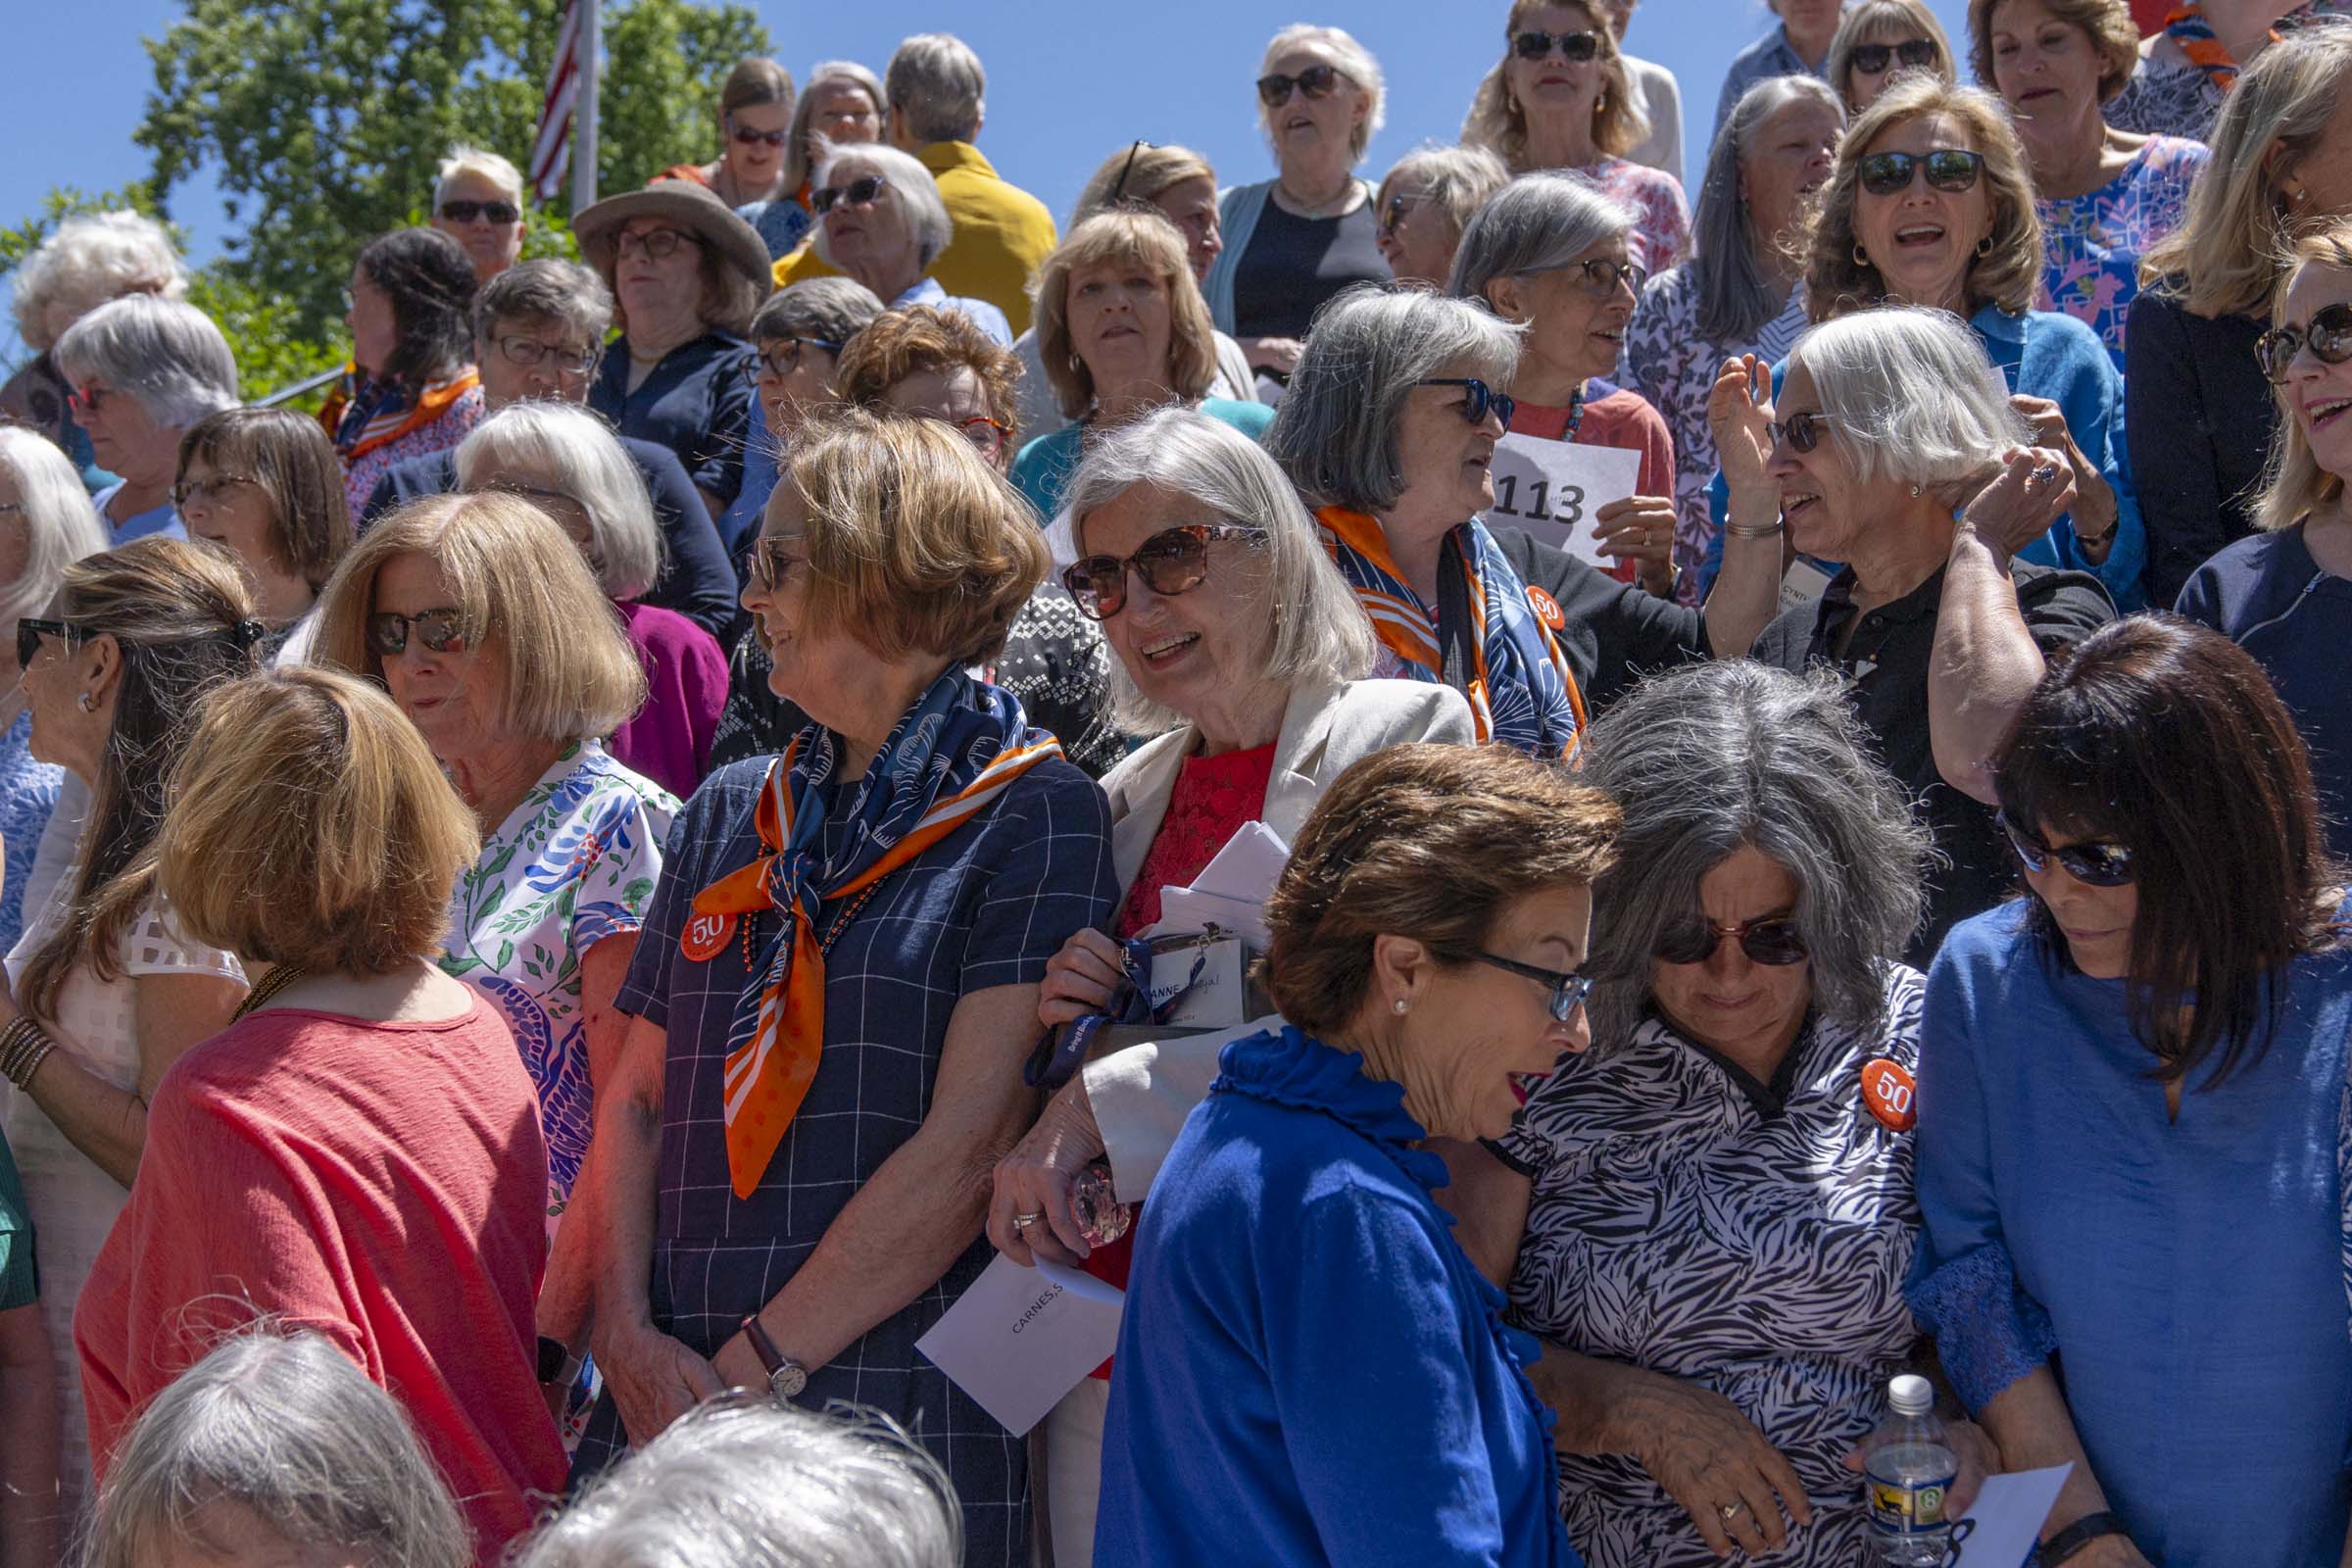 About 140 alumnae of UVA’s class of 1974 gathered on the steps of the Rotunda